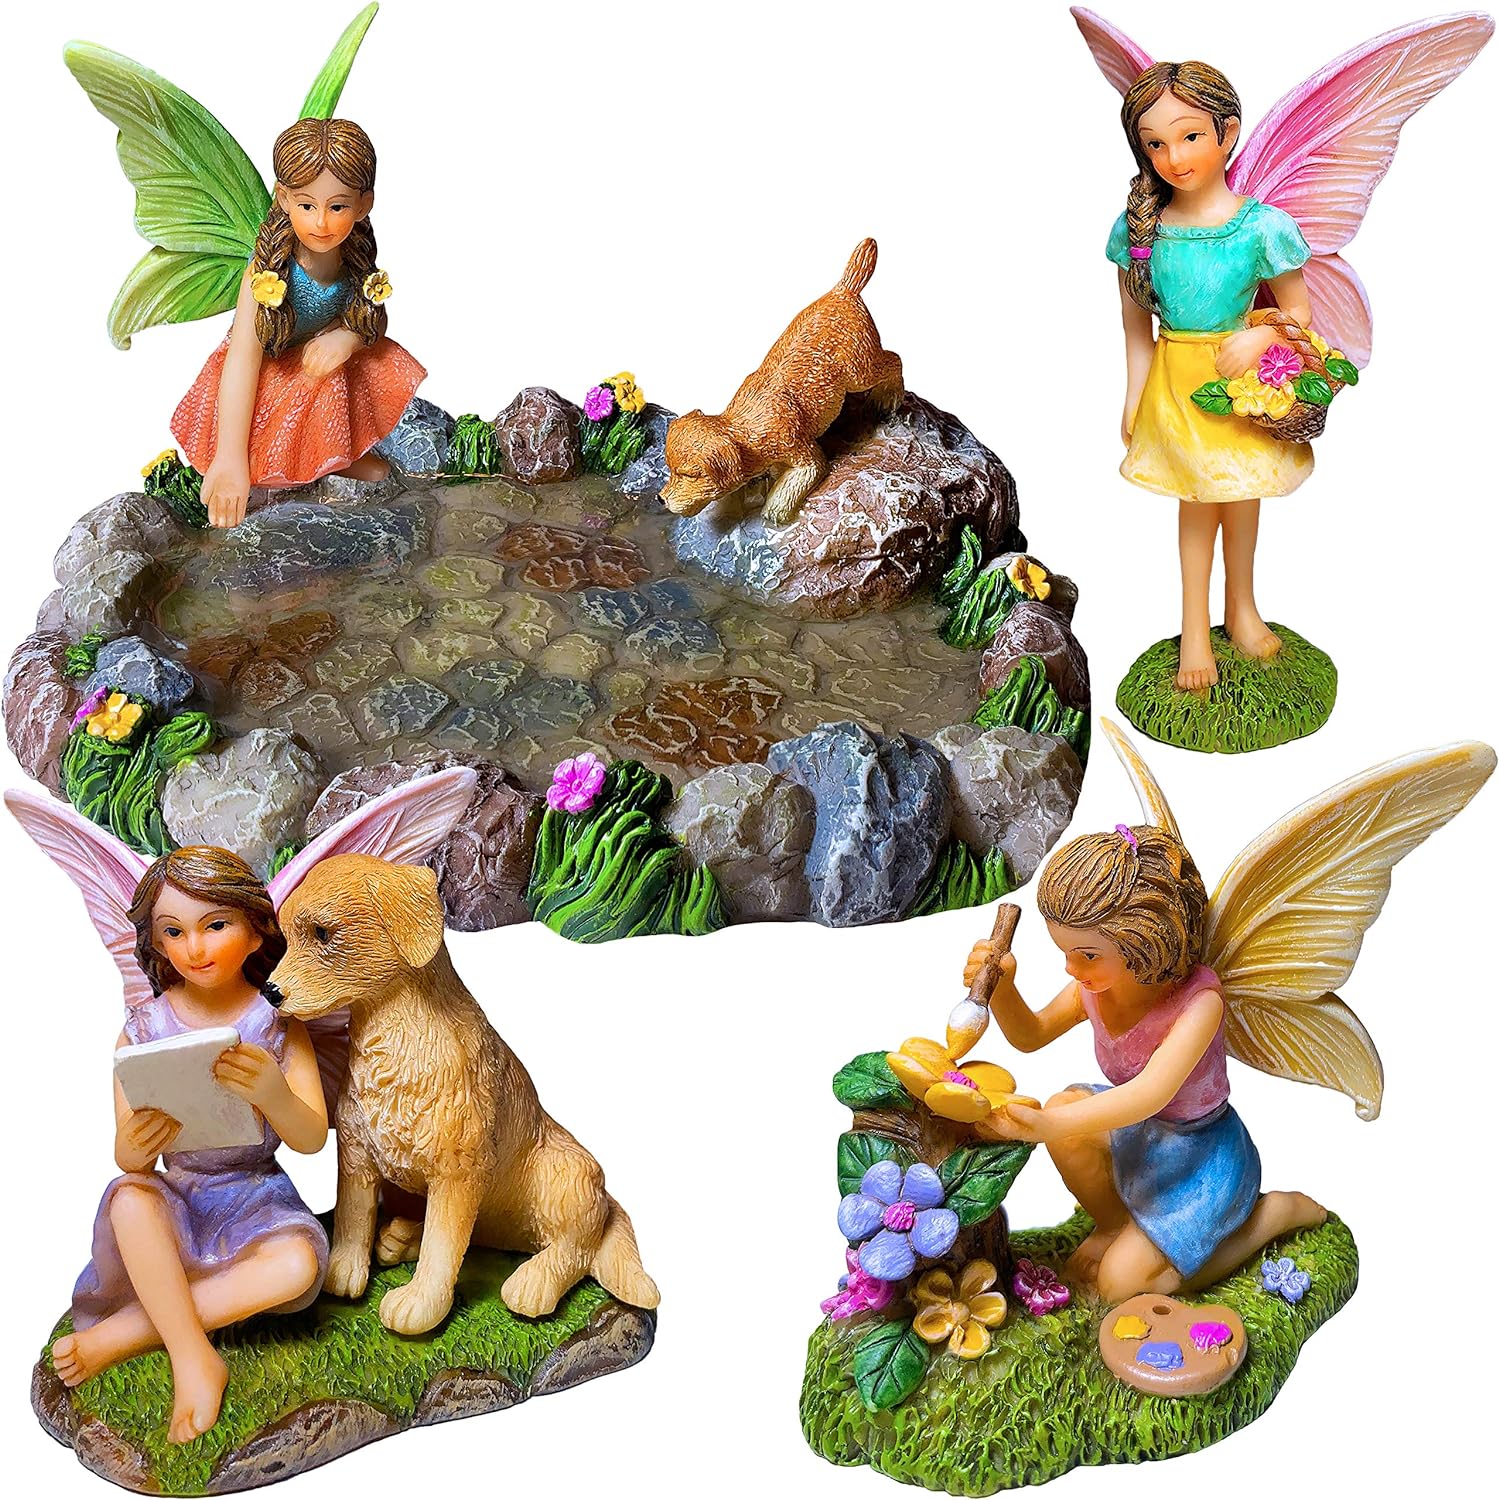 2 mood lab fairy garden miniature pond kit figurines & accessories set of 5 pcs outdoor or house décor